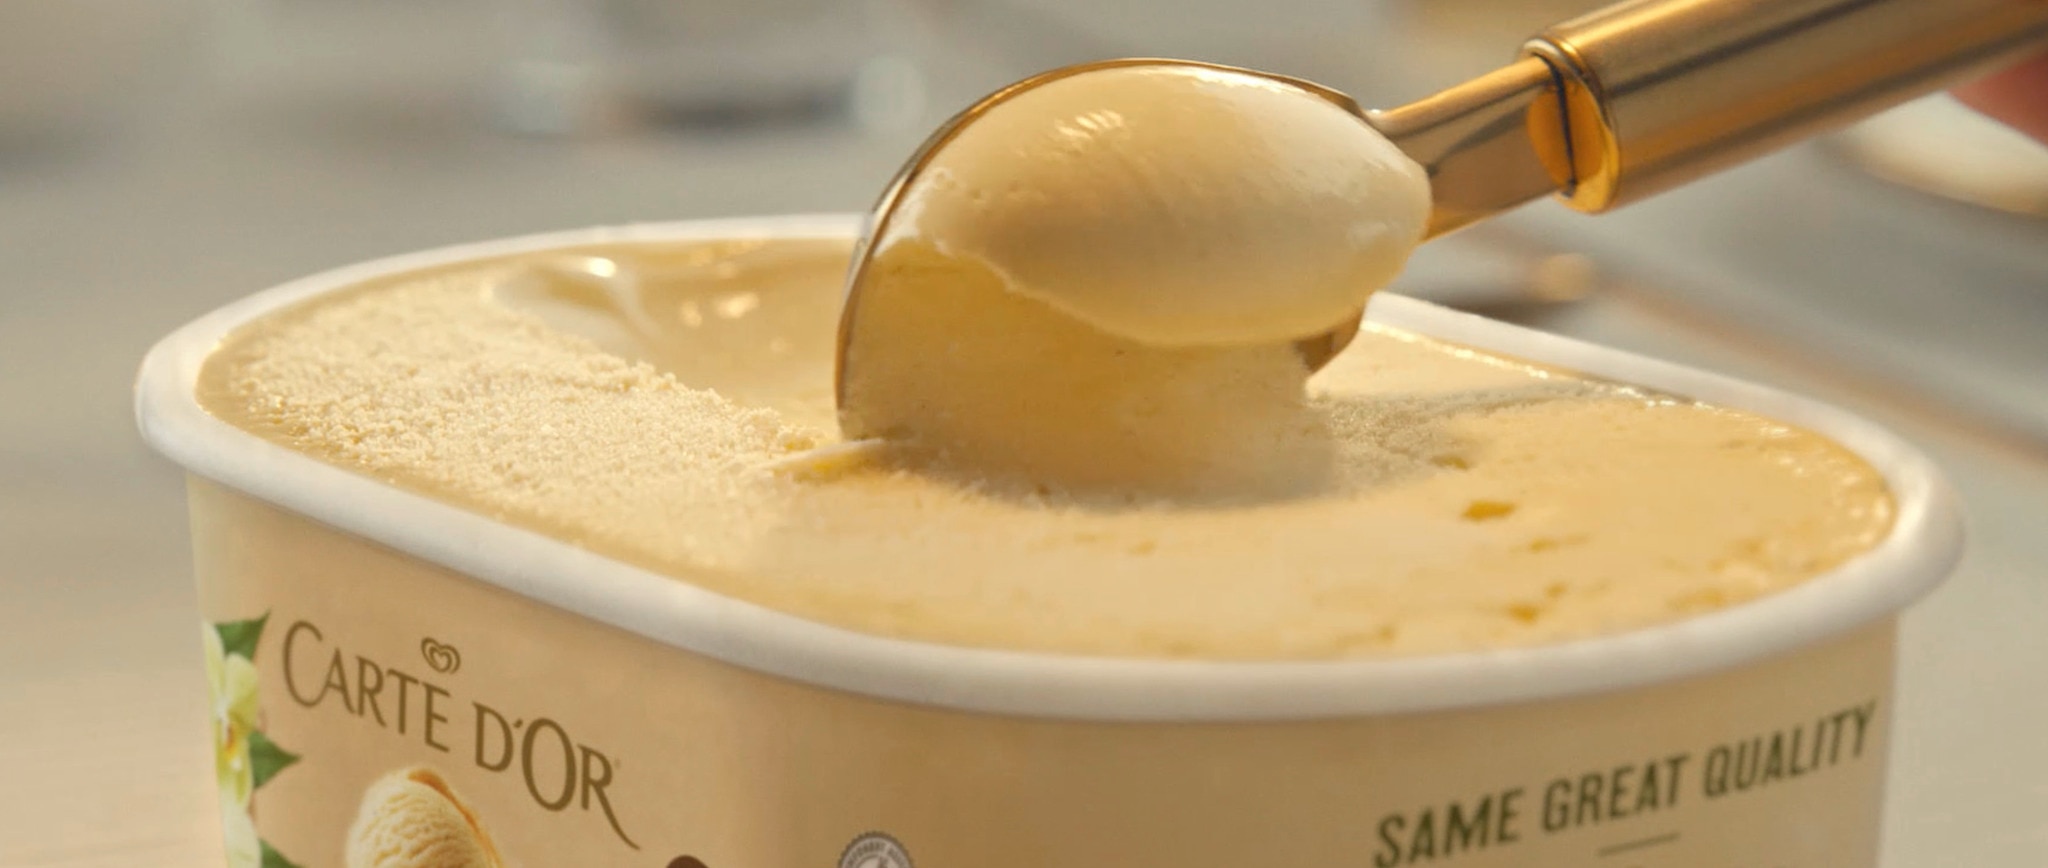 Carte d'or ice cream scooped from a tub